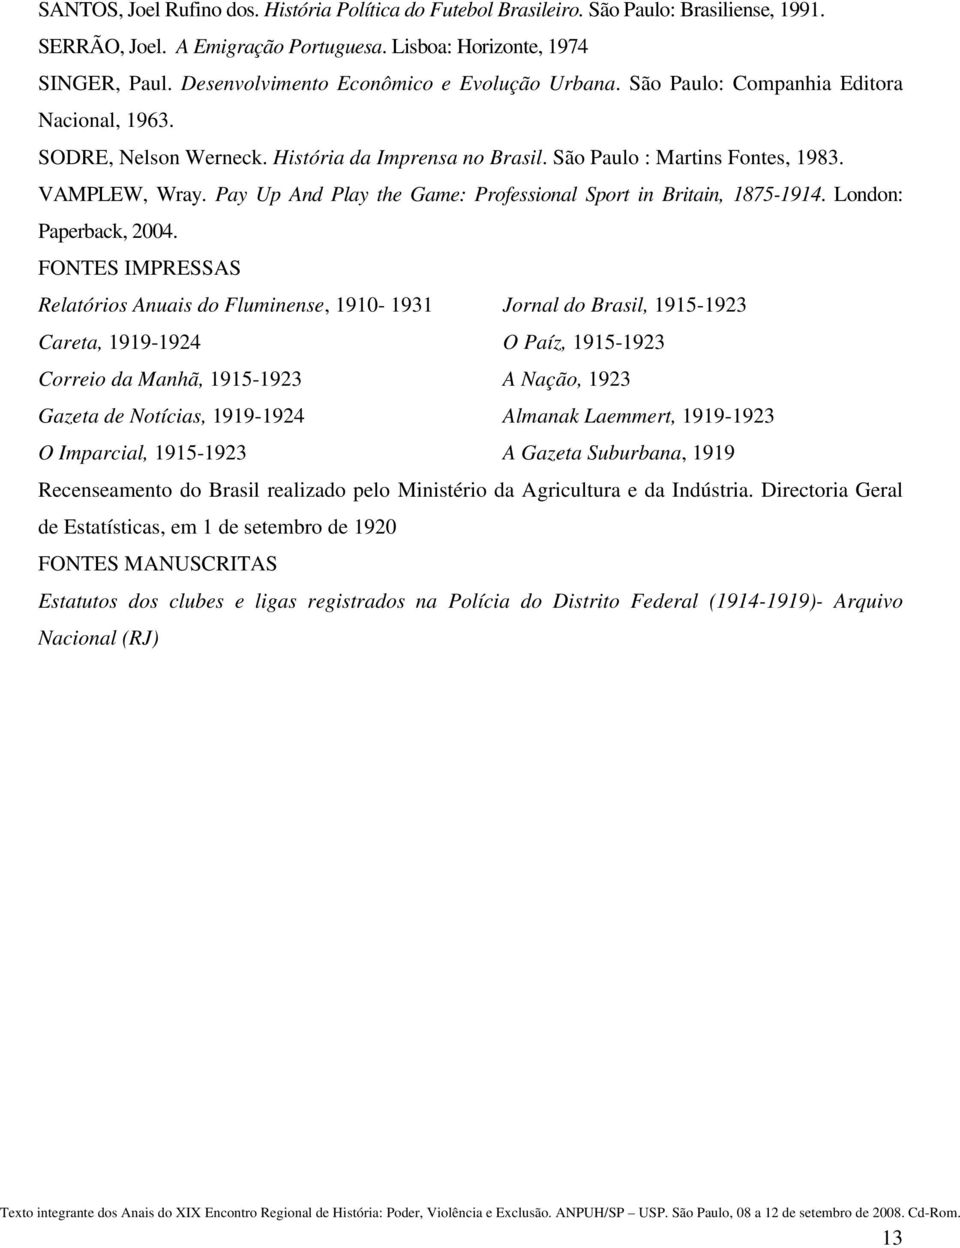 Pay Up And Play the Game: Professional Sport in Britain, 1875-1914. London: Paperback, 2004.